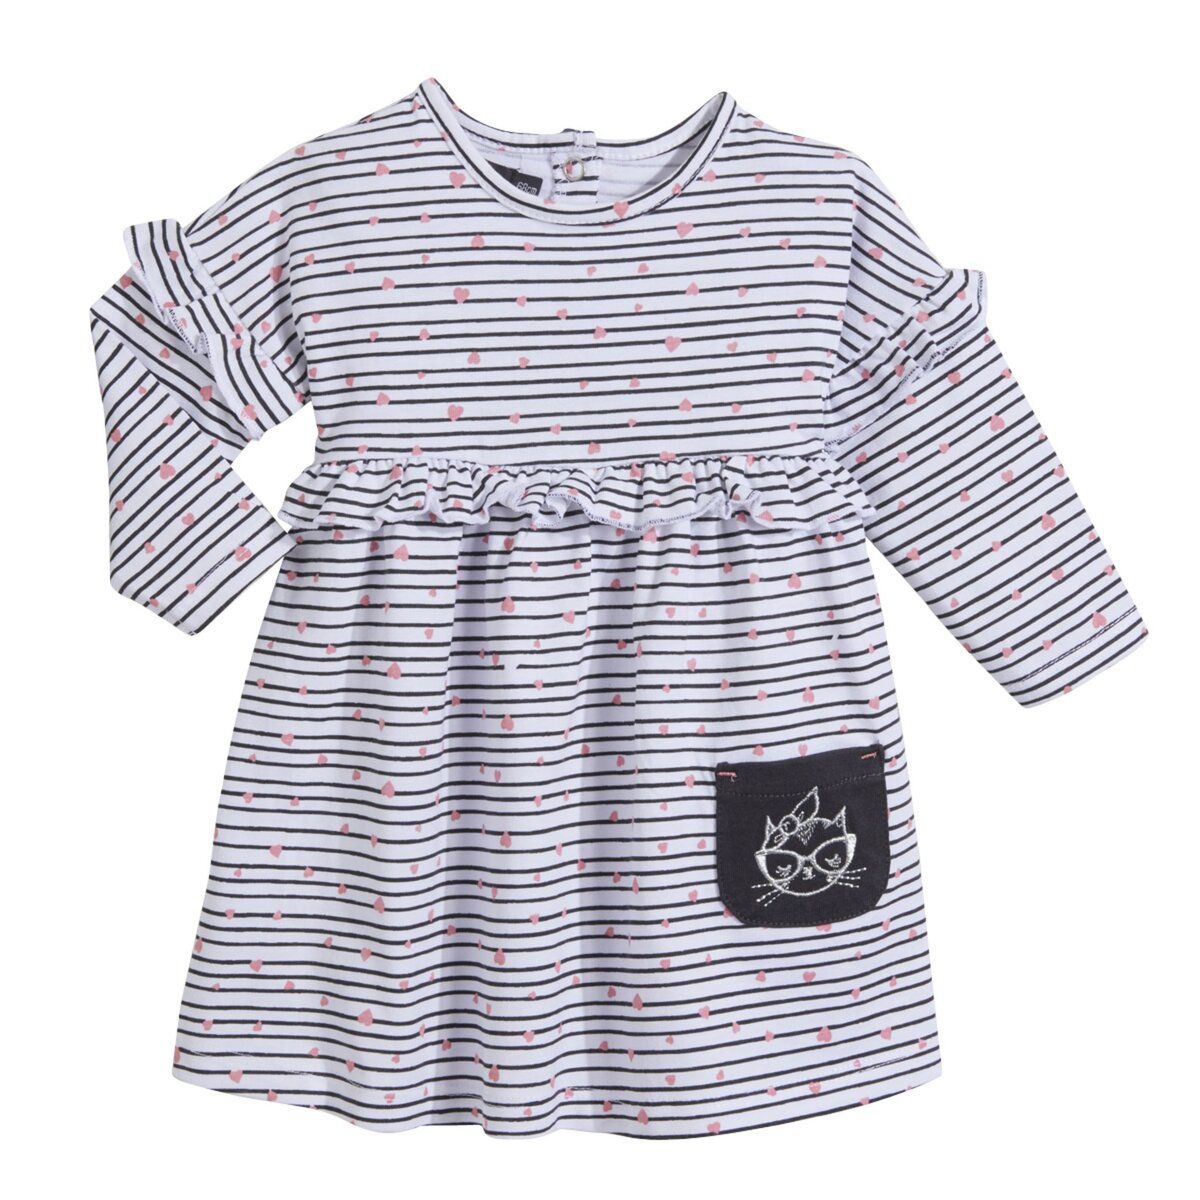 IN EXTENSO Robe jersey manches longues bébé fille